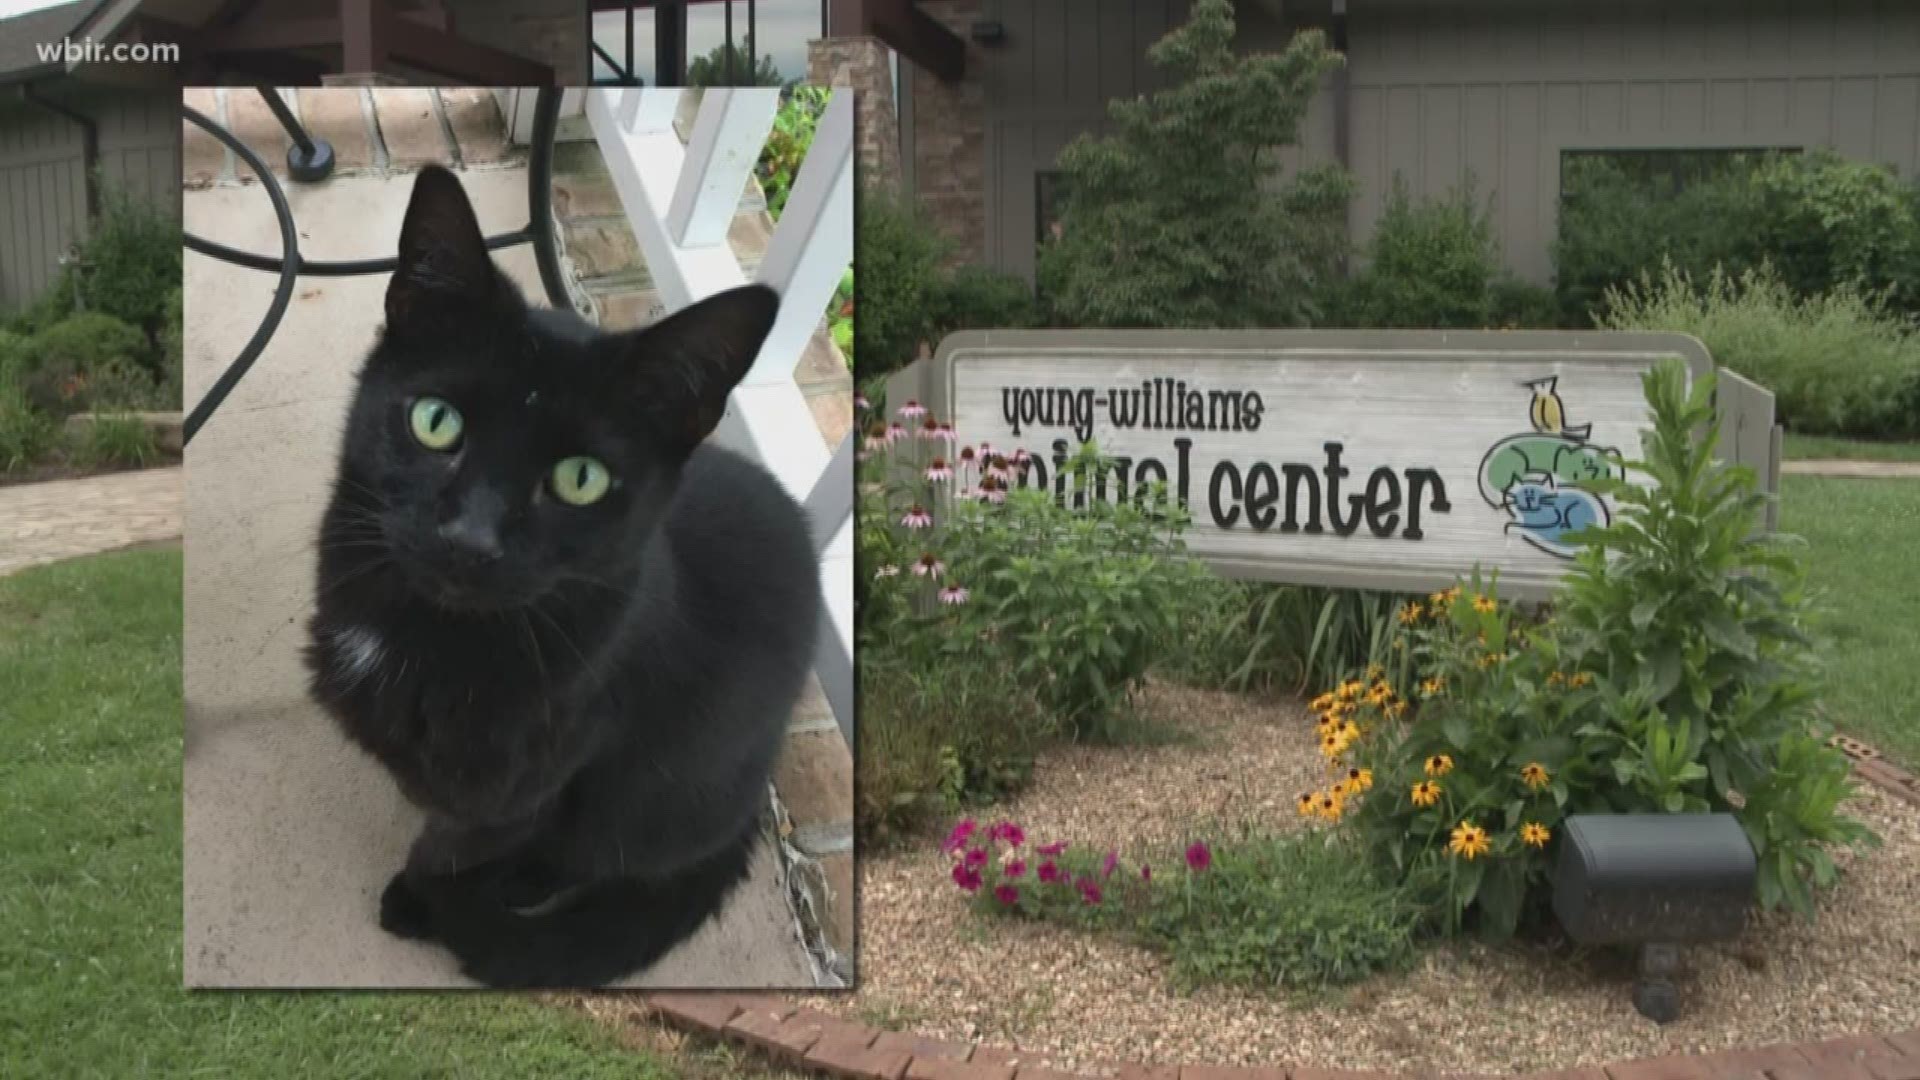 A cat was adopted by new owners after Young Williams Animal Center accidentally sent it to a feral cat farm in Loudon. The new adopters have been contacted about the mix-up. June 18, 2018.